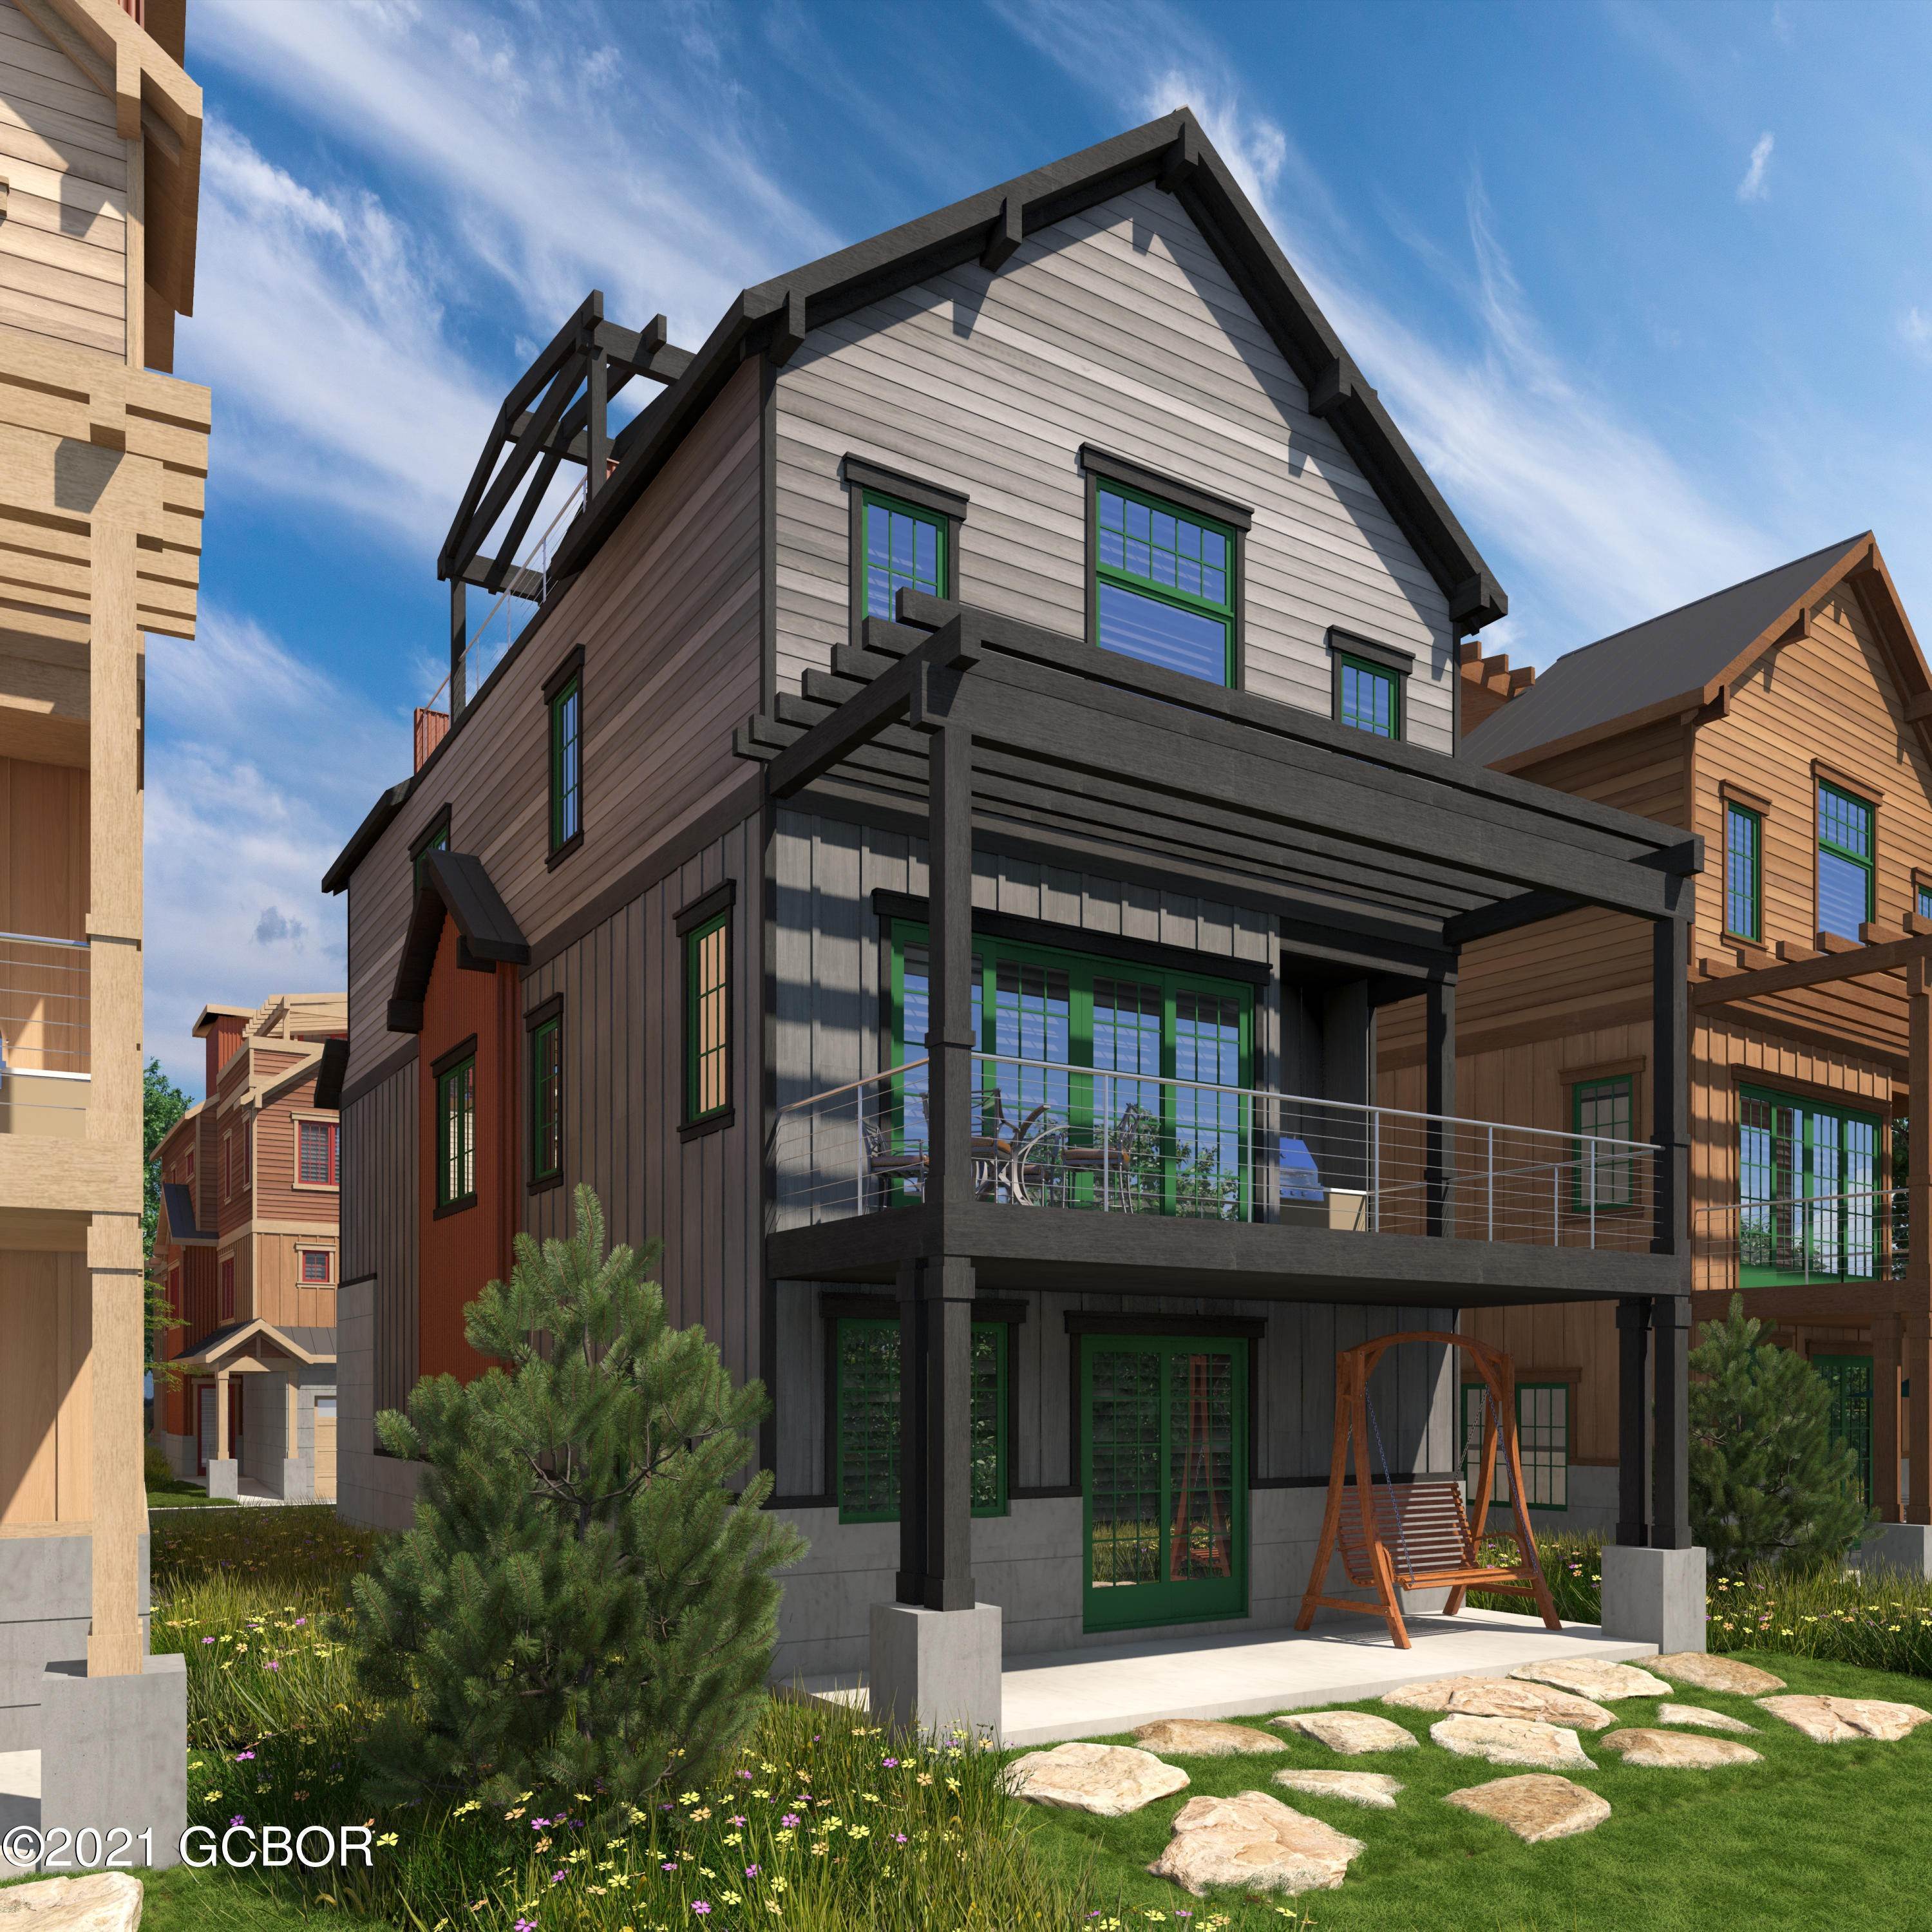 Single Family Homes for Active at 62 Ramble Lane Winter Park, Colorado 80482 United States